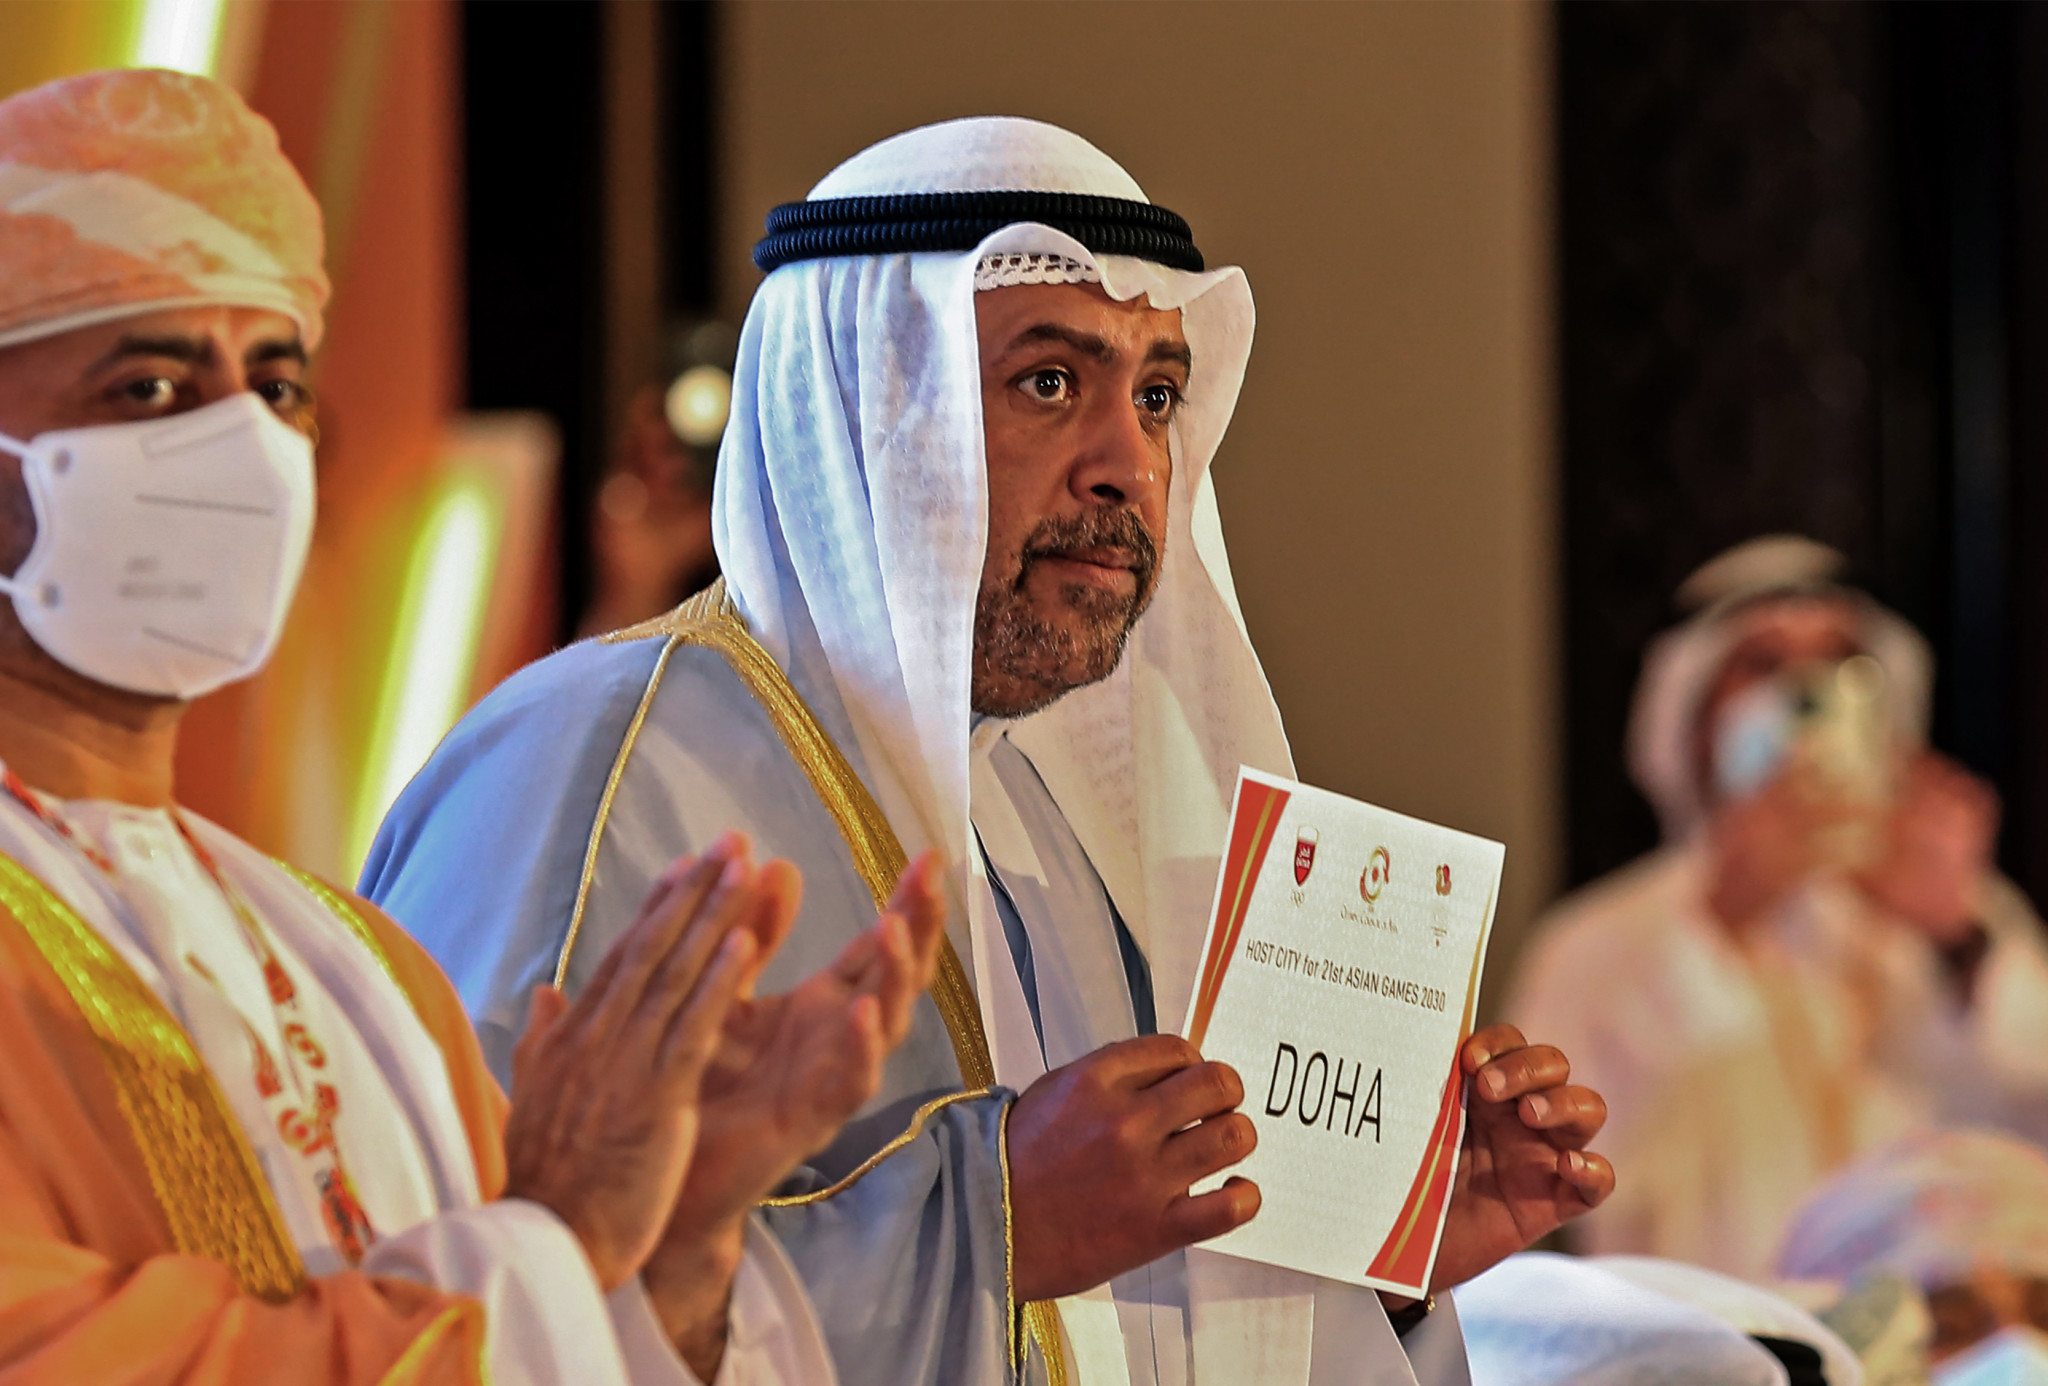 Doha will host the 2030 Asian Games, with the event returning to Qatar for the second time ©OCA